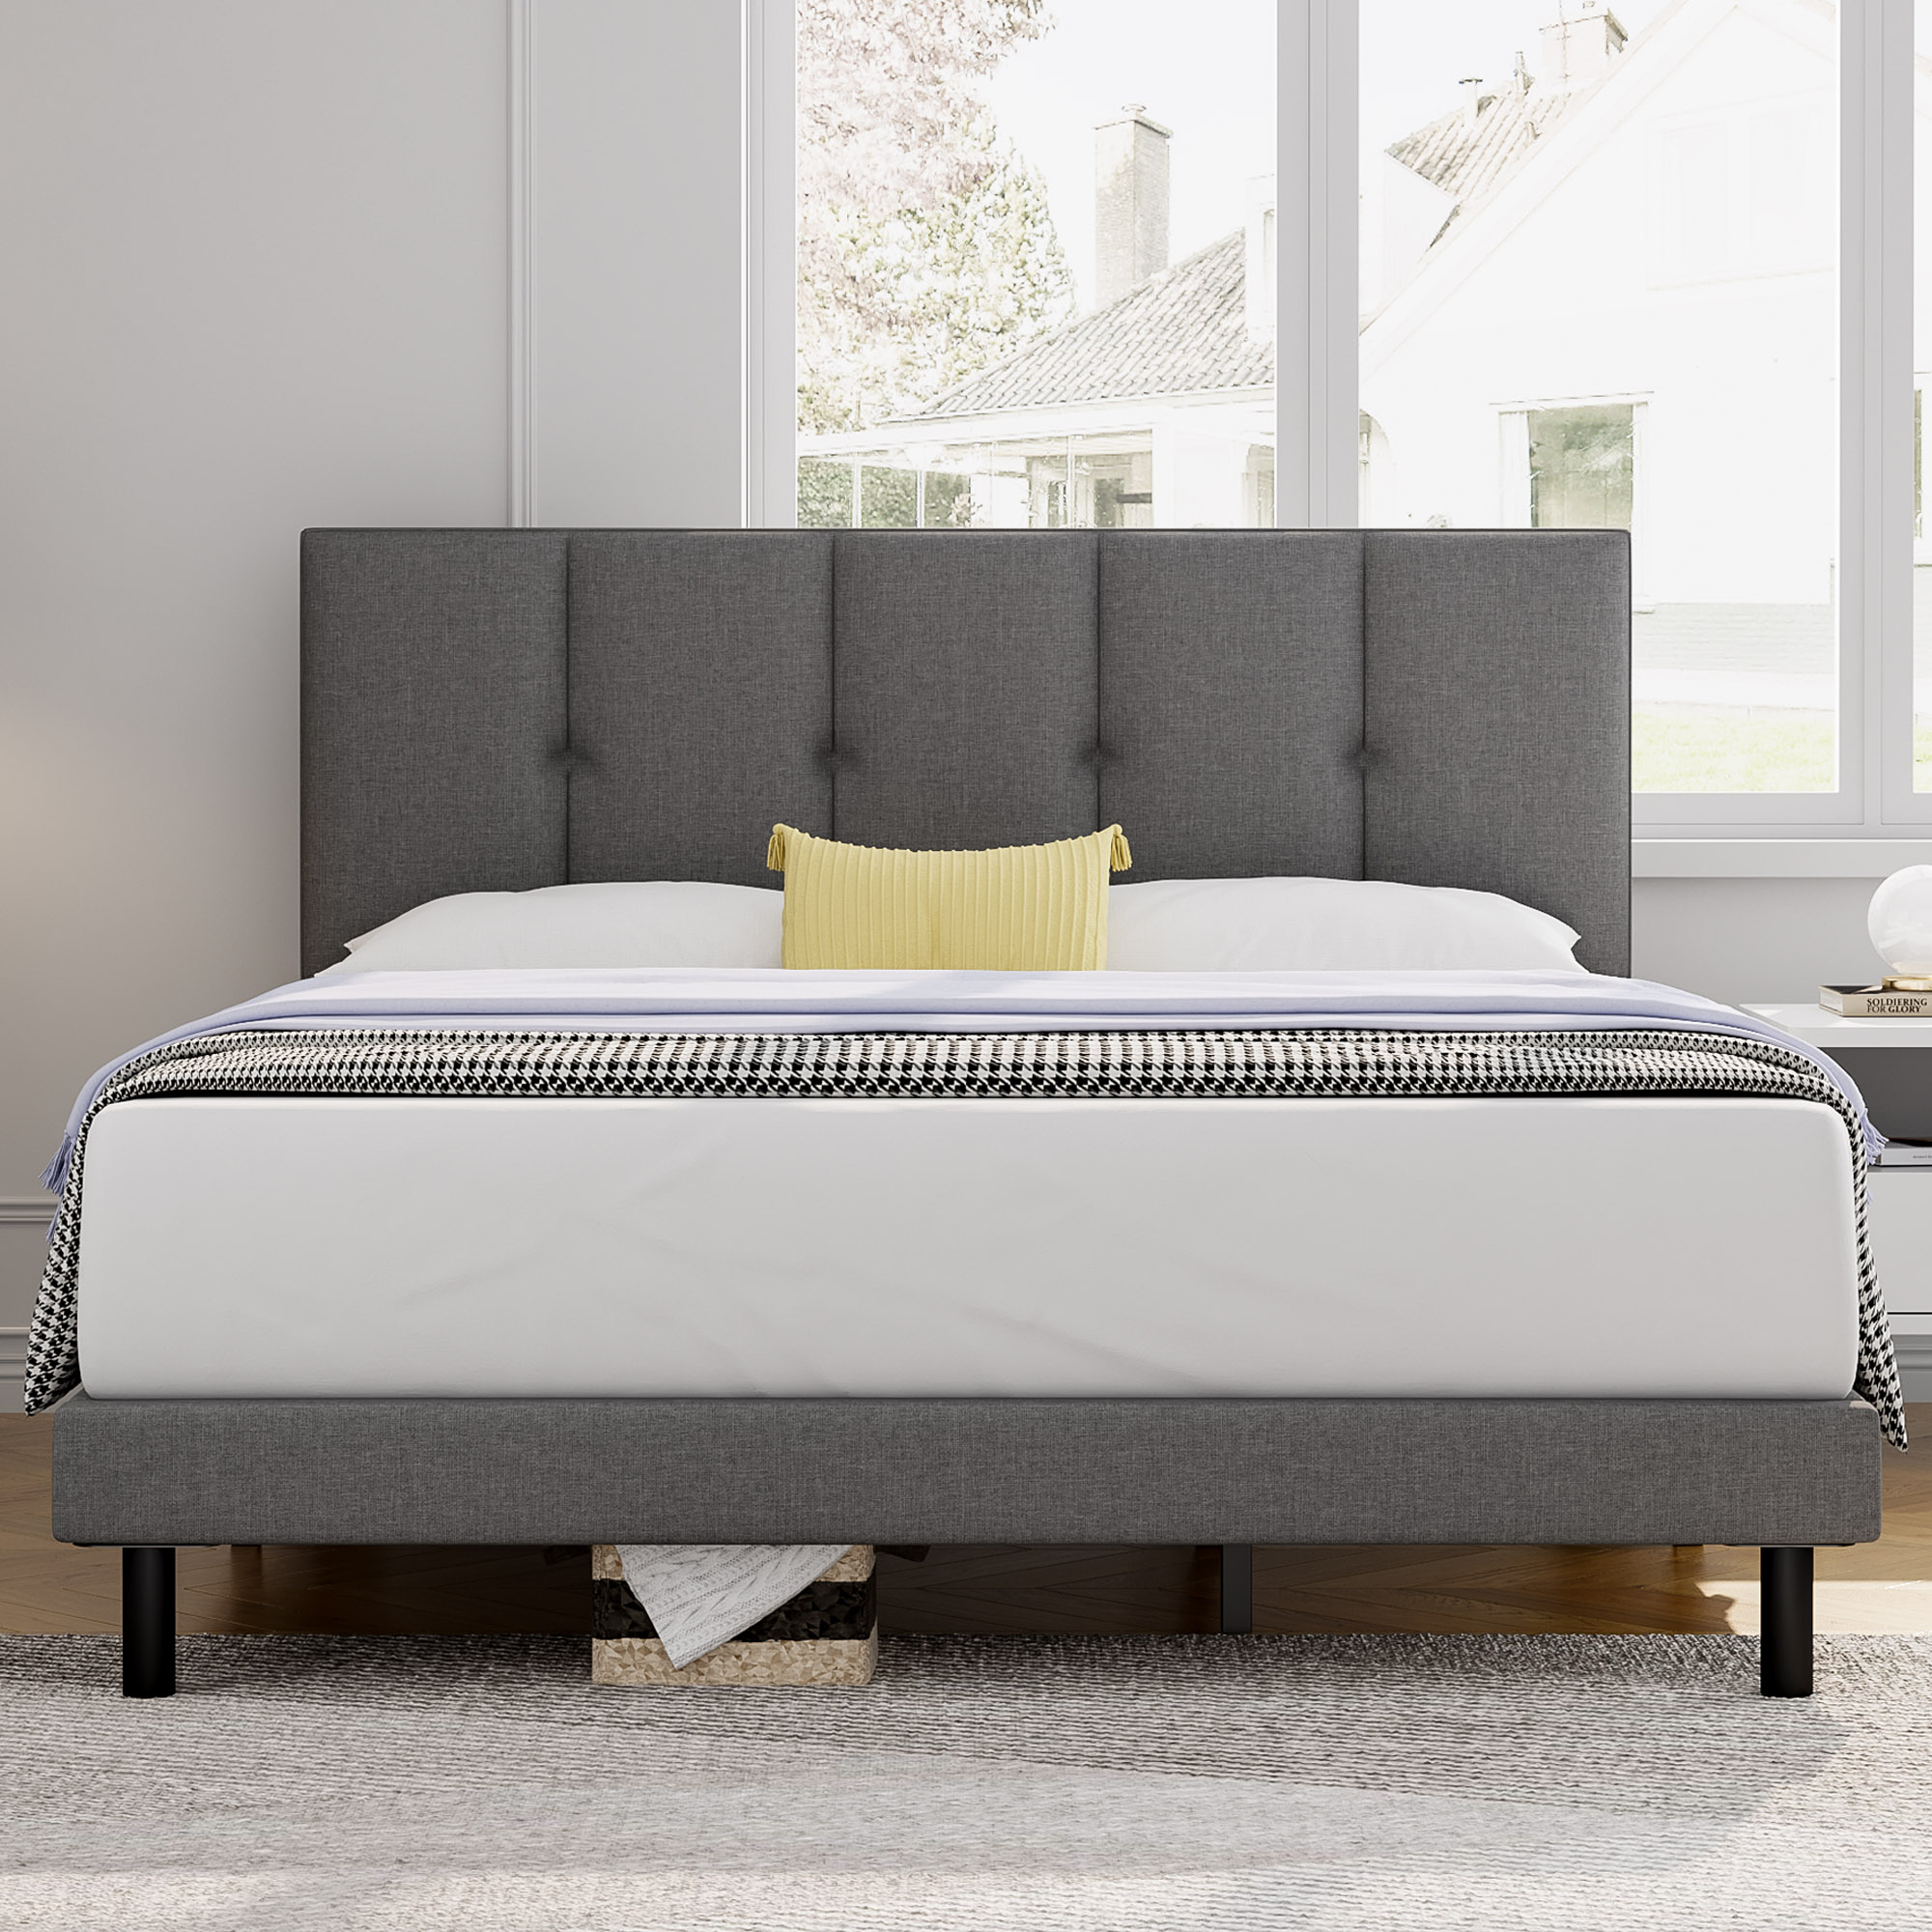 Full Bed Frame, HAIIDE Full Size Bed Frame with Upholstered Headboard and Strong Wooden Slats, Light Grey - image 1 of 7